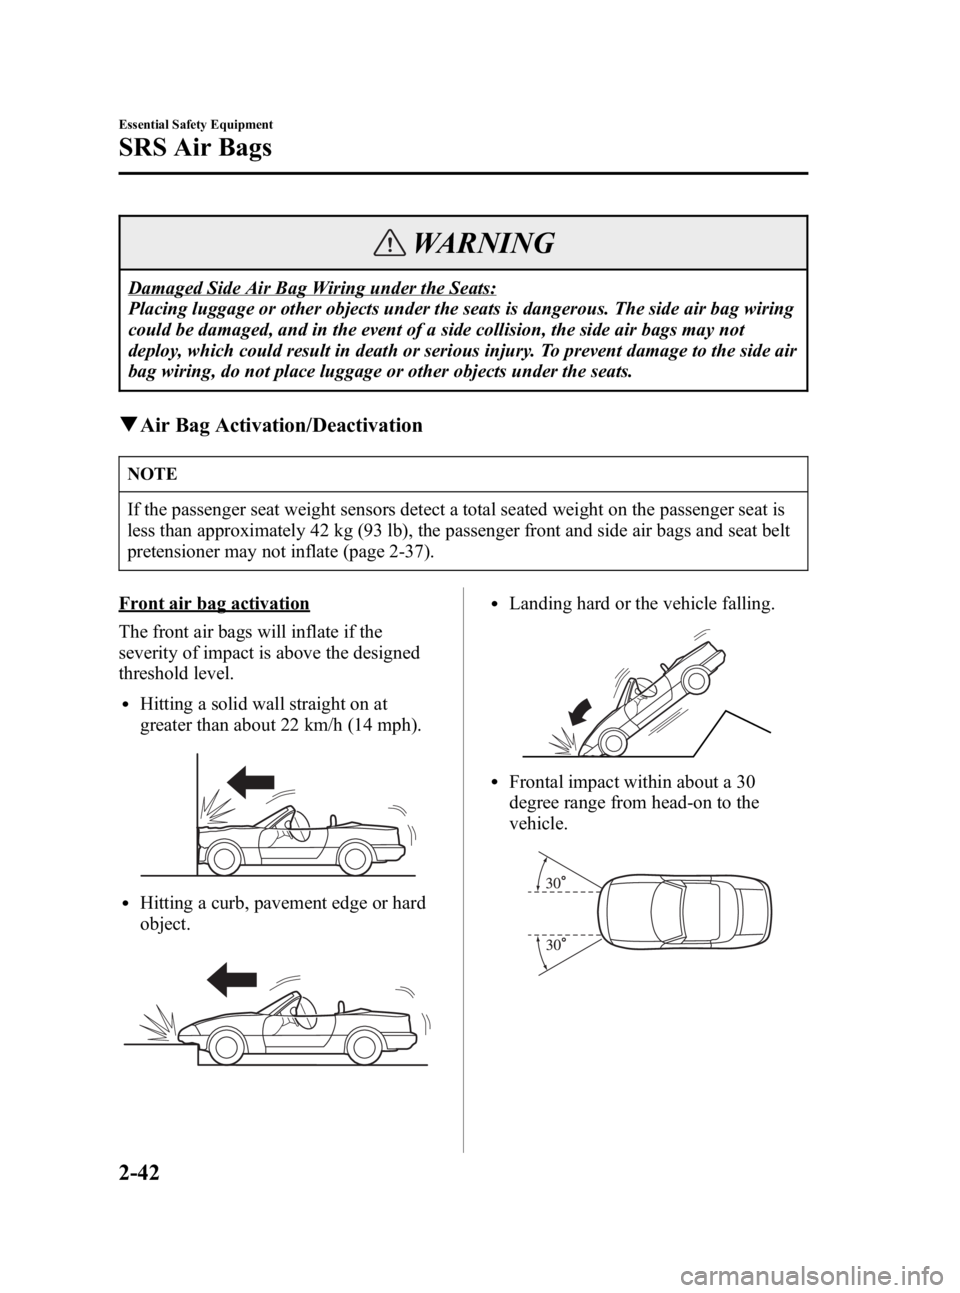 MAZDA MODEL MX-5 MIATA 2006 Owners Manual Black plate (54,1)
WARNING
Damaged Side Air Bag Wiring under the Seats:
Placing luggage or other objects under the seats is dangerous. The side air bag wiring
could be damaged, and in the event of a s